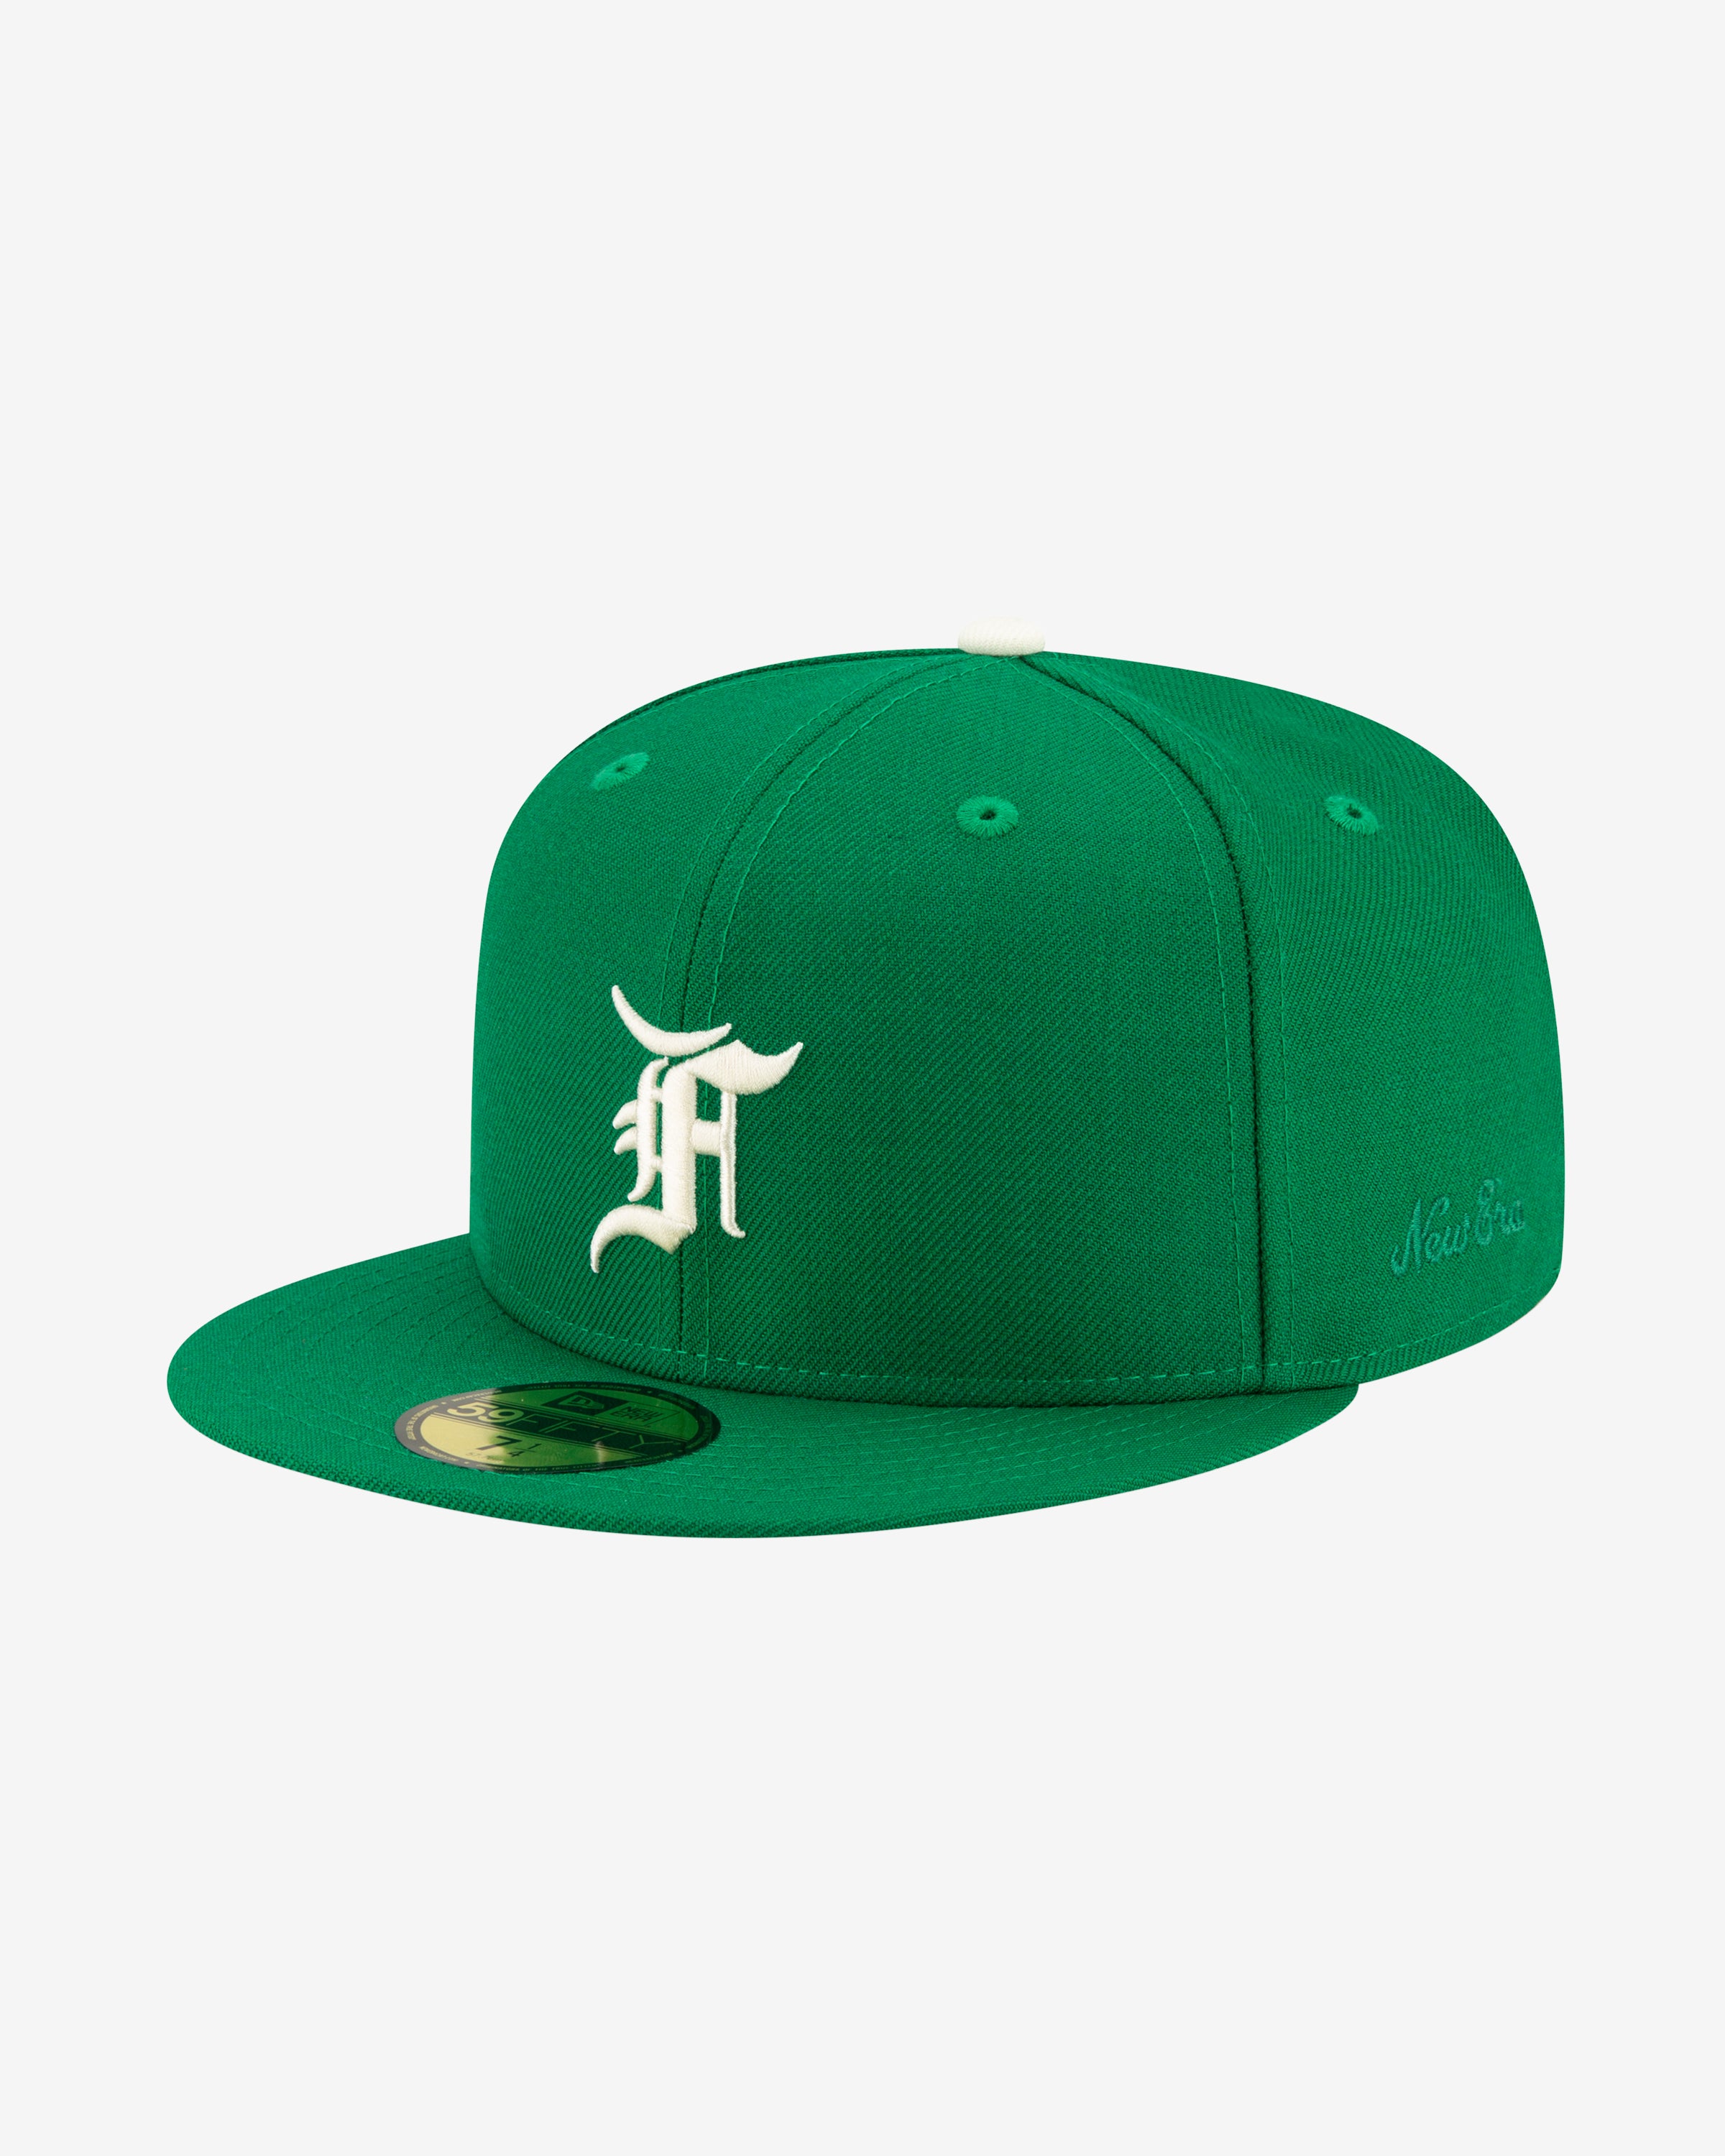 NEW ERA X FEAR OF GOD 59FIFTY - KELLYGREEN – Undefeated